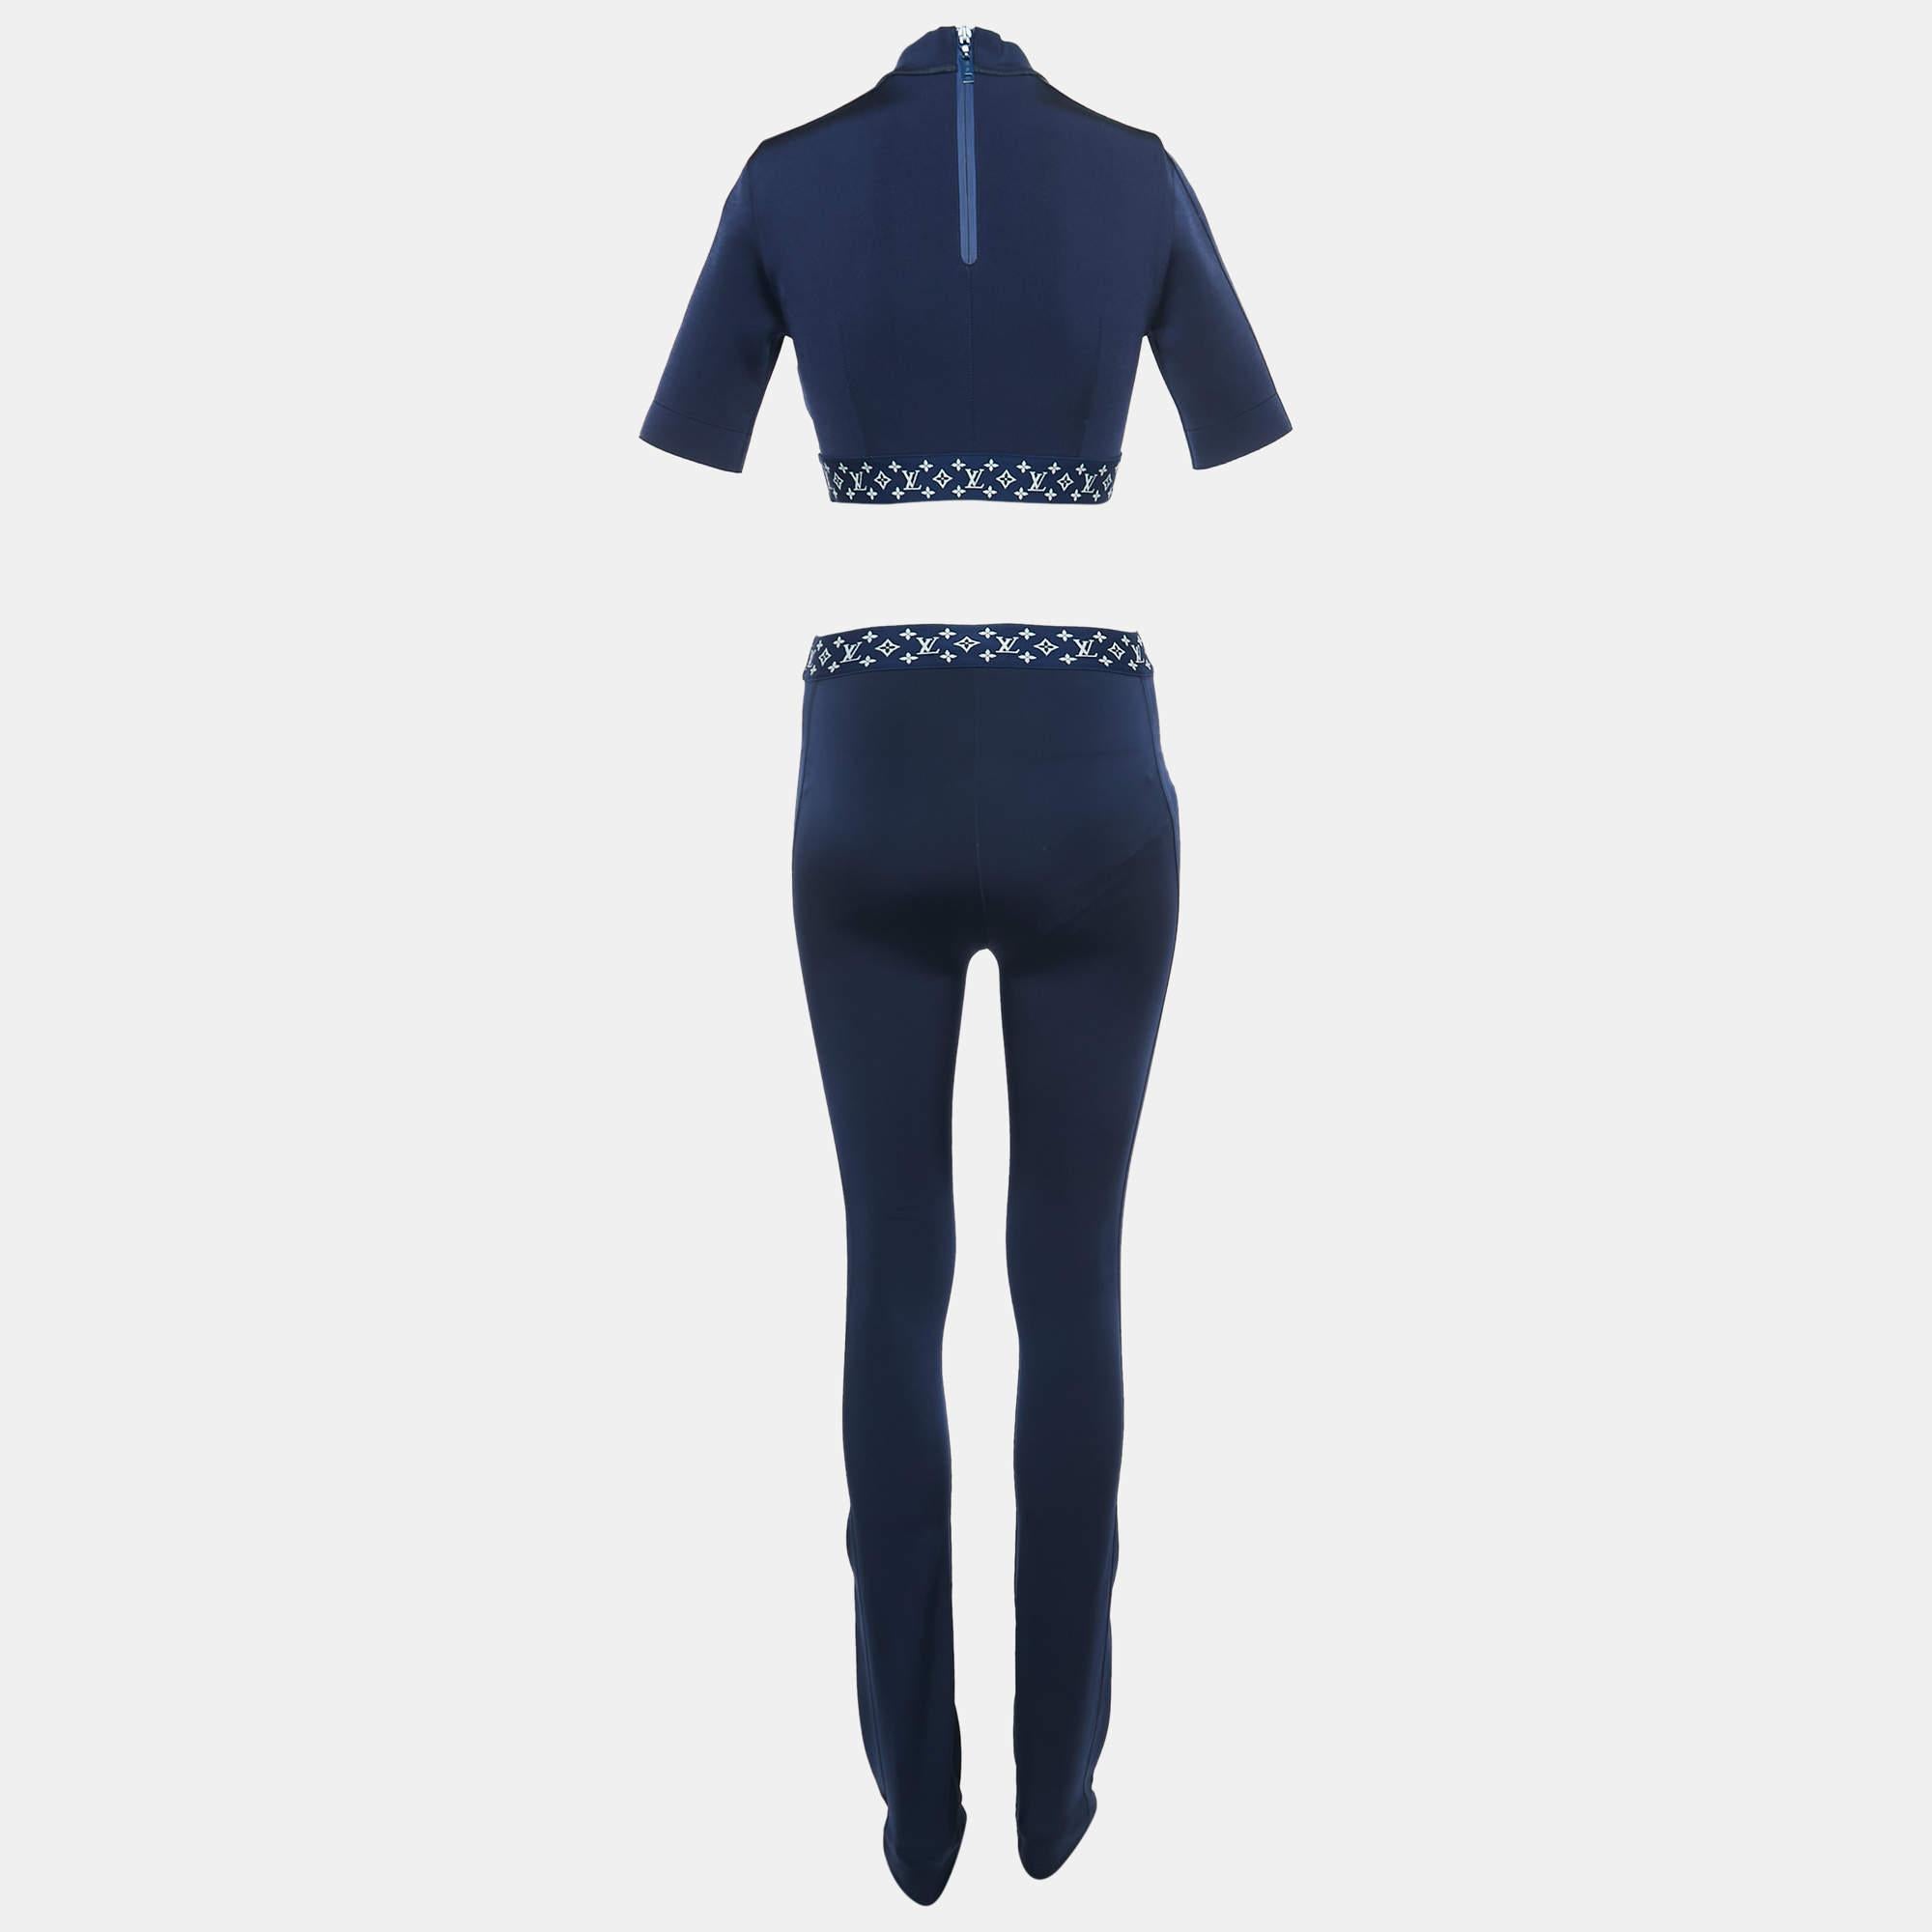 Careful tailoring, quality materials, and elegant cuts make this Louis Vuitton top & leggings set a great choice! It comes in classic hues with Monogram accents for that ultimate LV charm.

